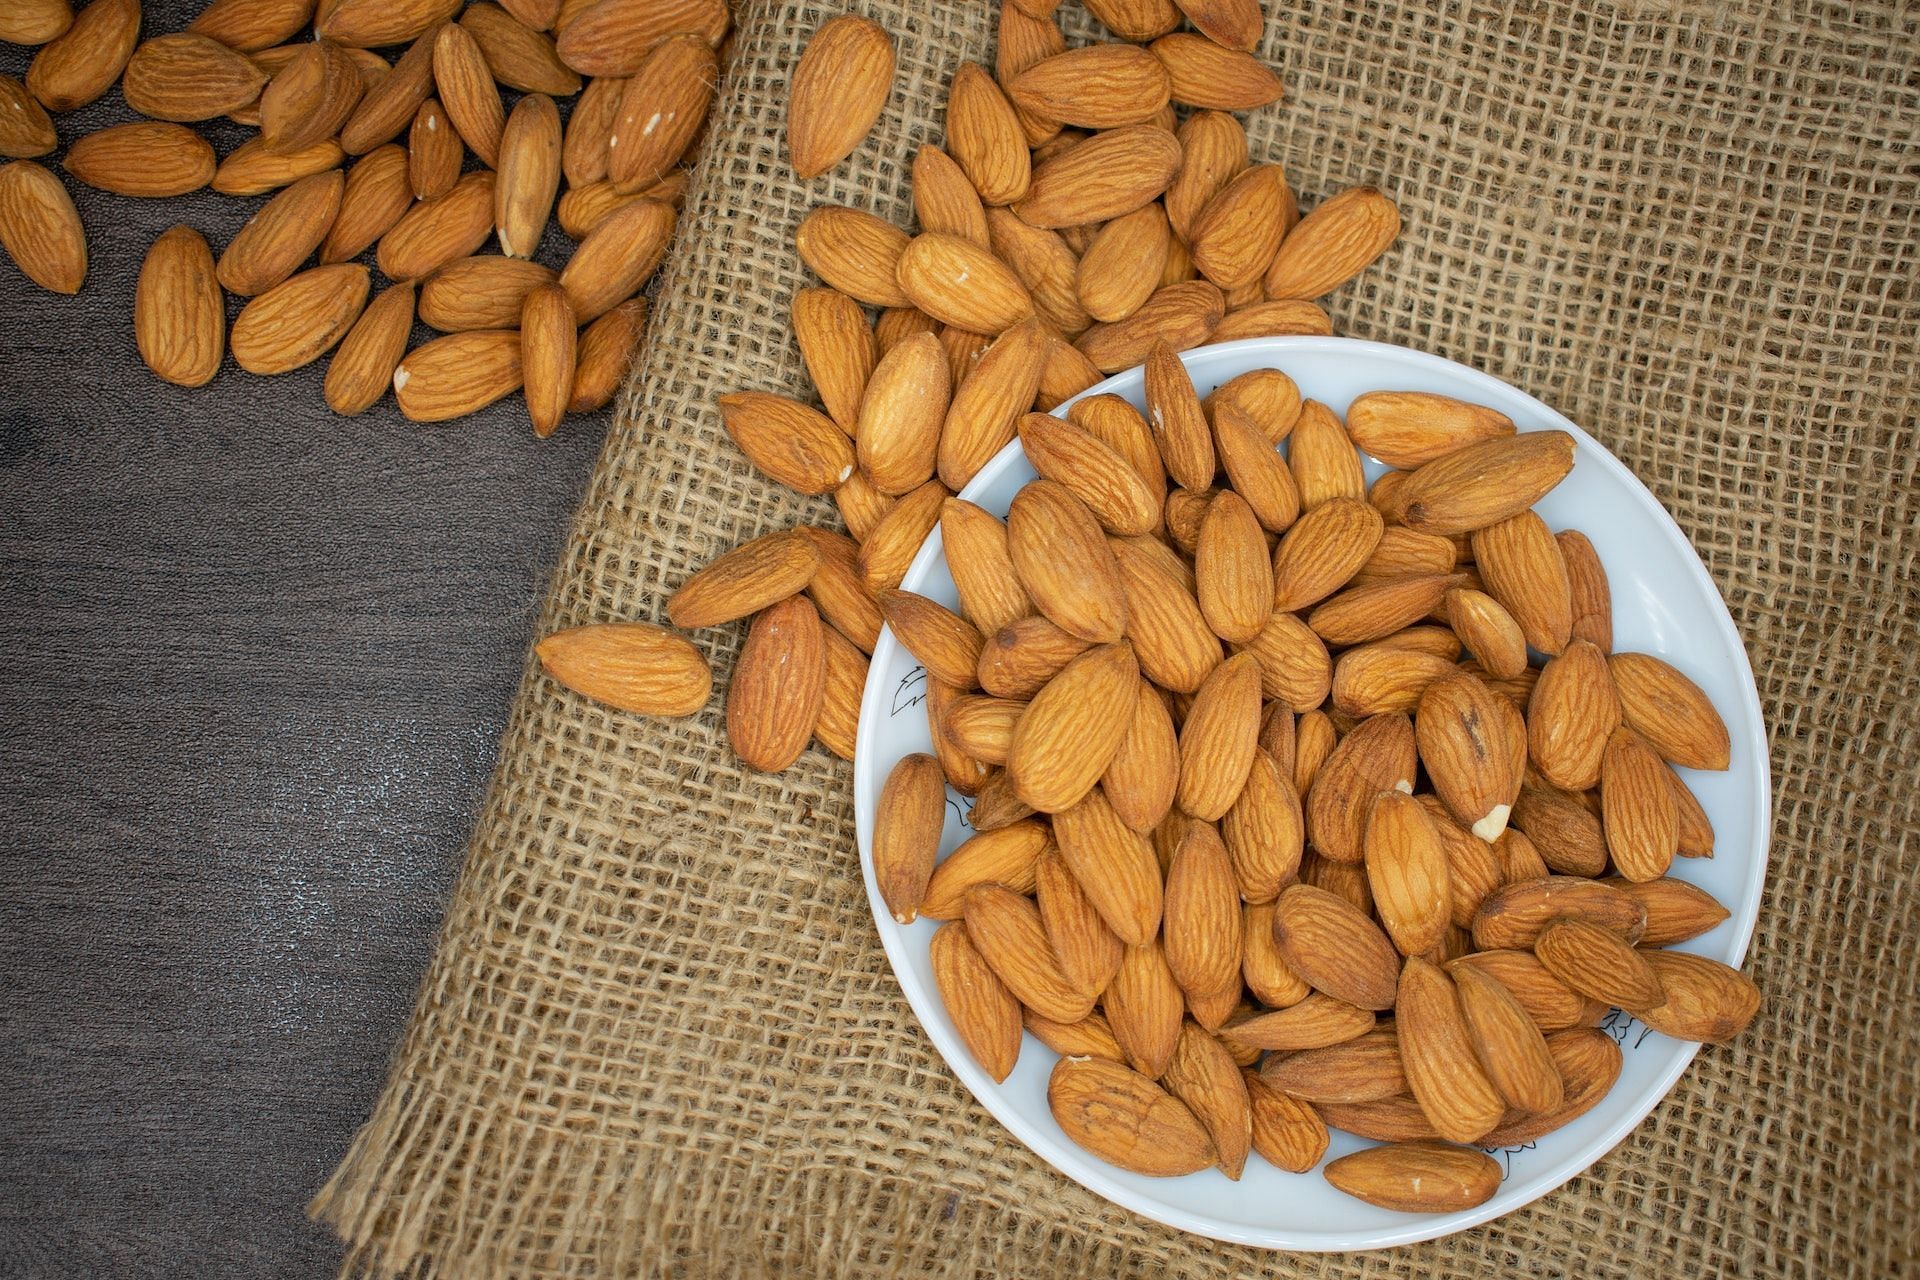 Almonds are rich in choline. (Photo via Pexels/Kafeel Ahmed)